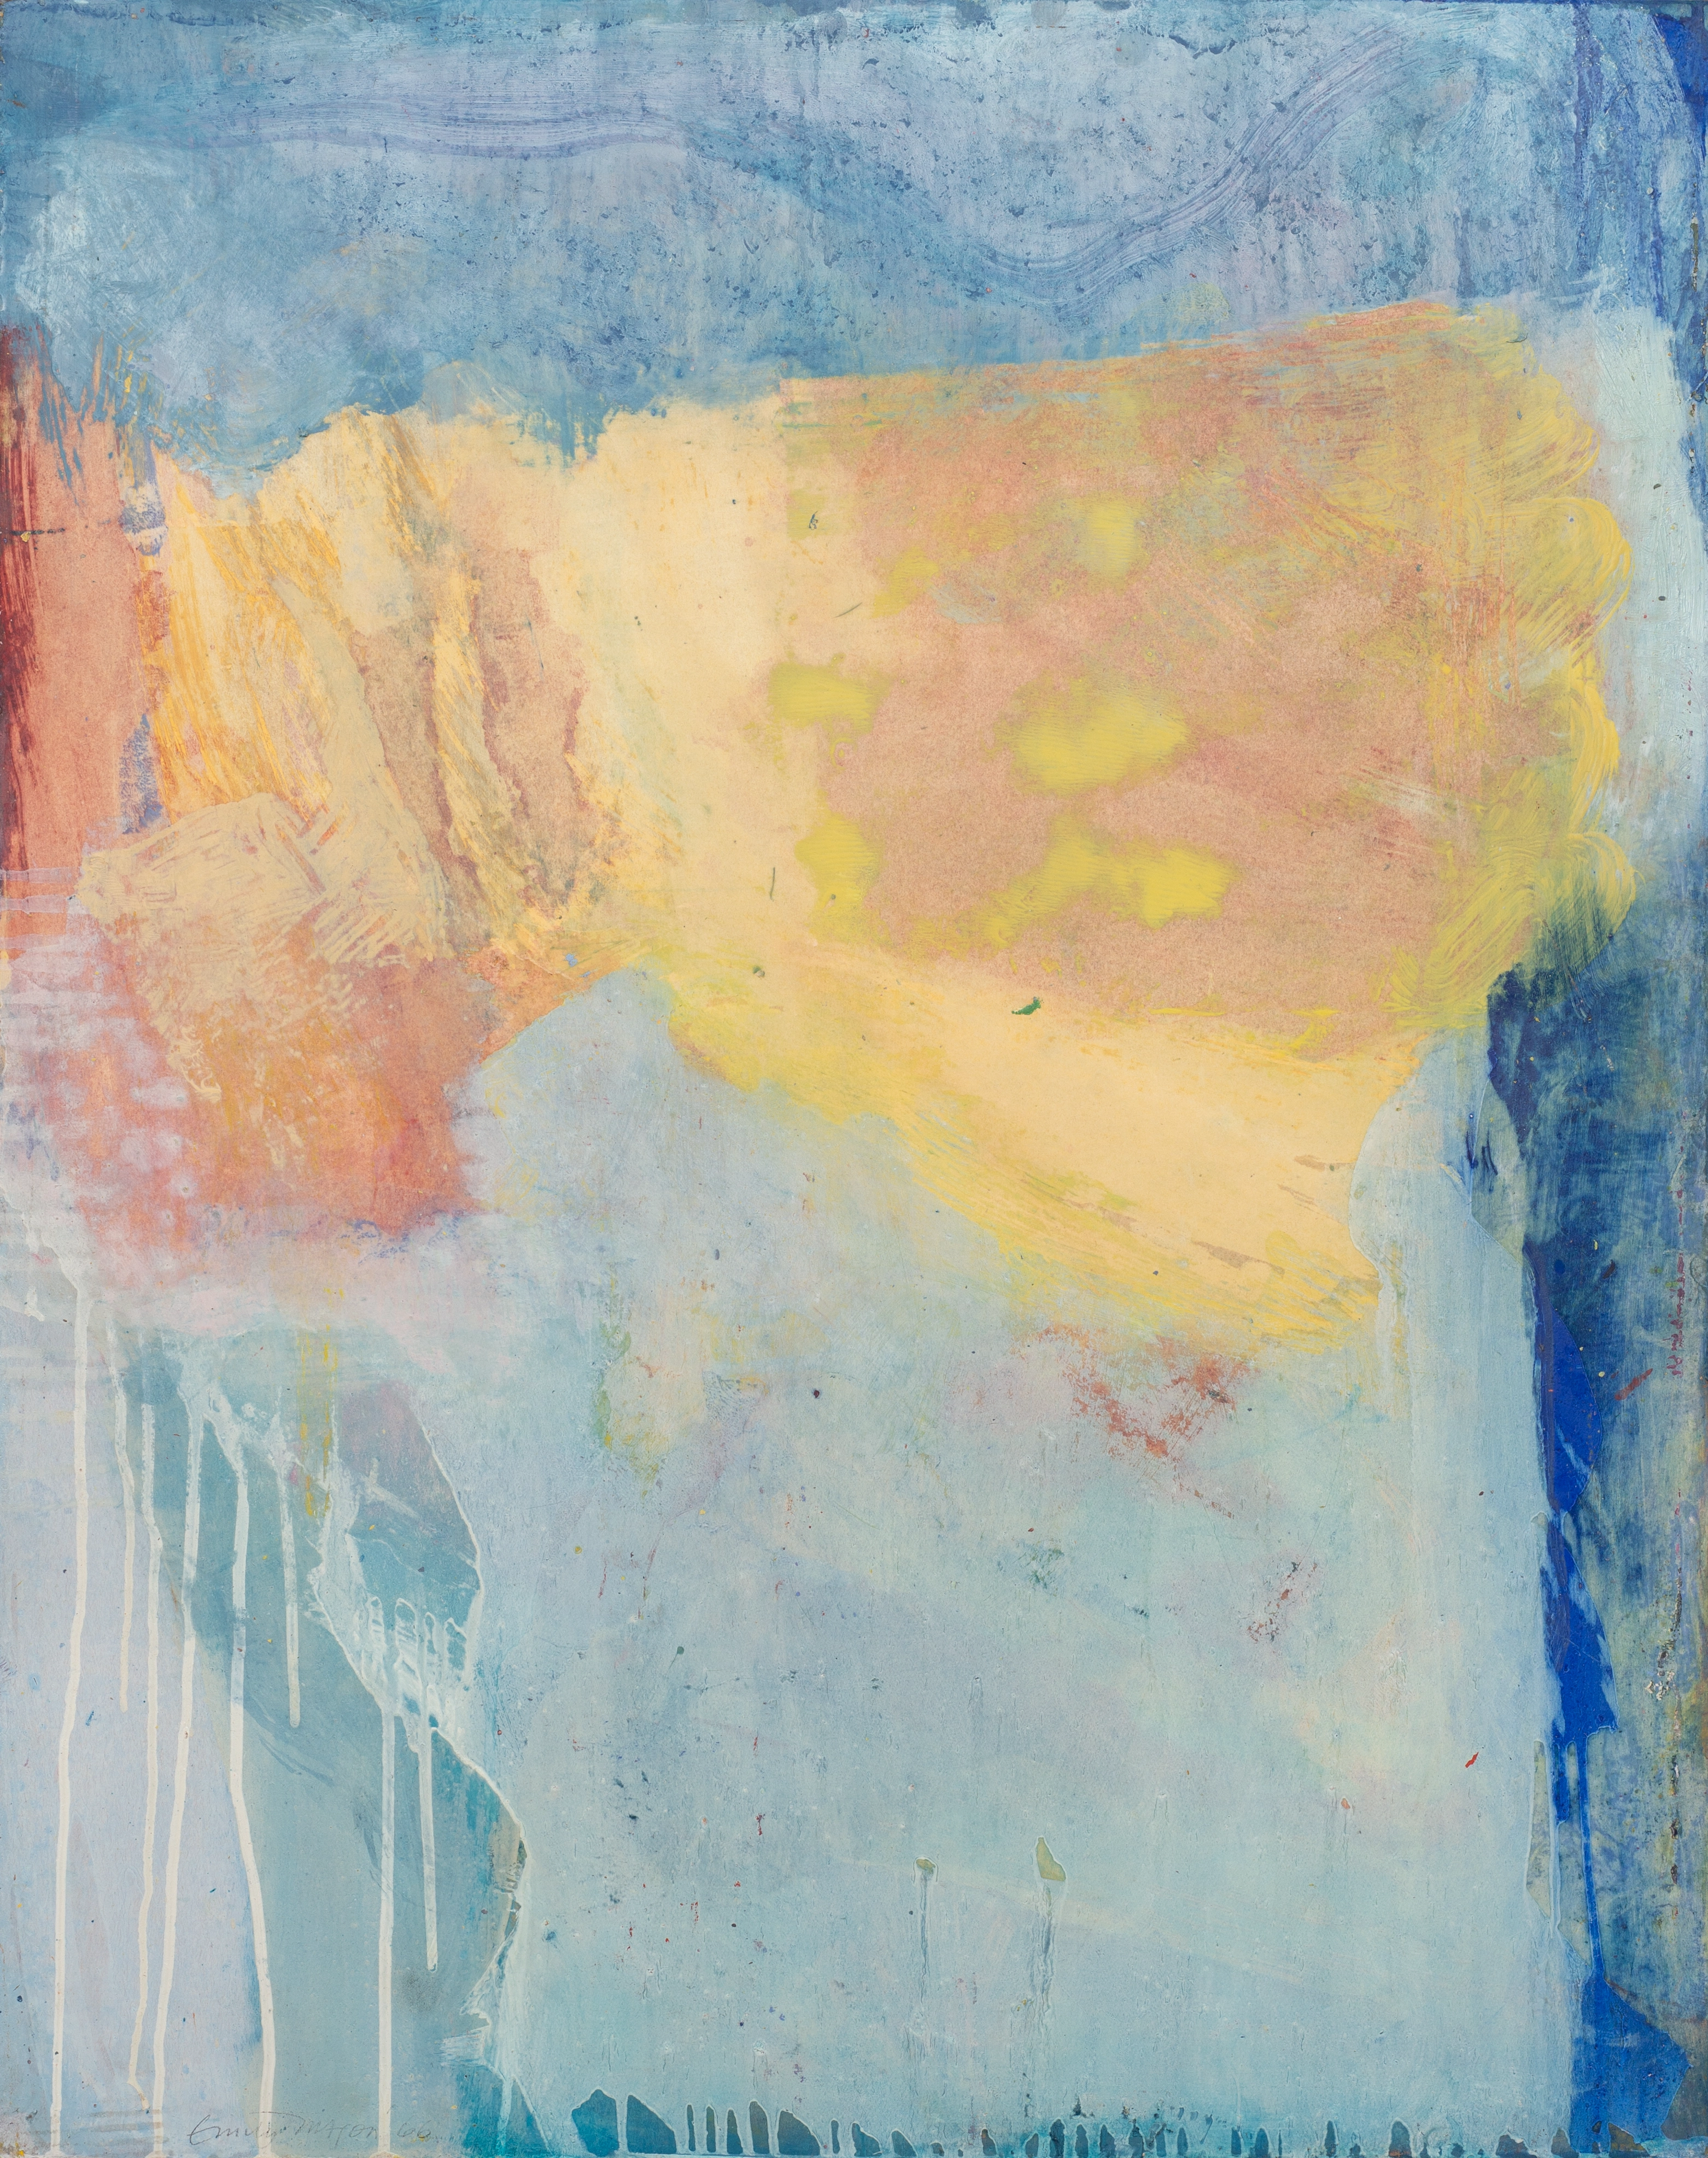 Abstract oil on paper work with light blues swatches of color, and vertical drips on the left. In the center of the work there is a large cream, yellow, and peach-colored band that stretched left to right.